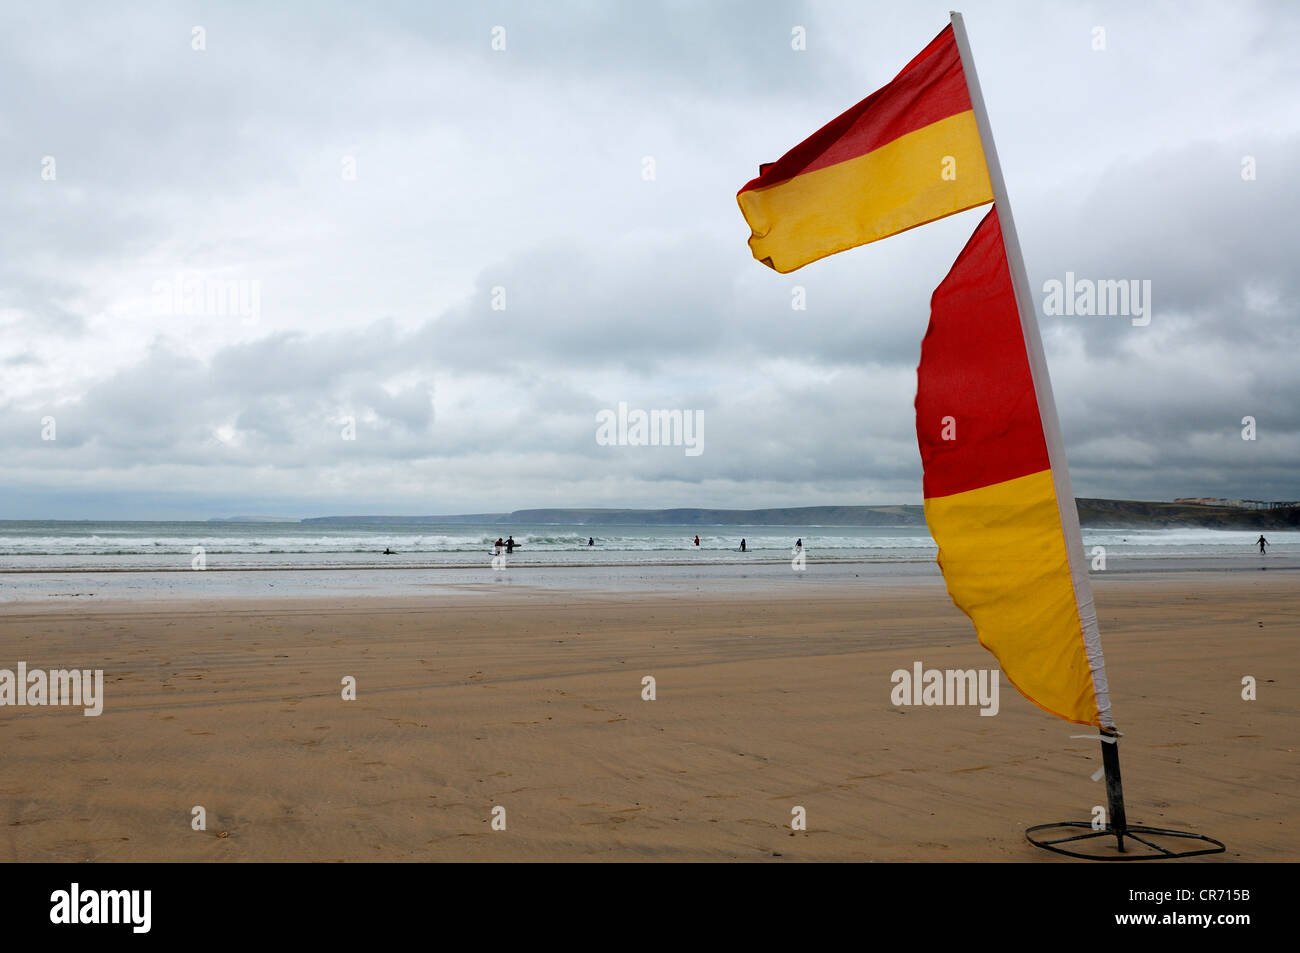 Warning flags during stormy weather on the beach of Newquay, Cornwall, England, United Kingdom, Europe Stock Photo